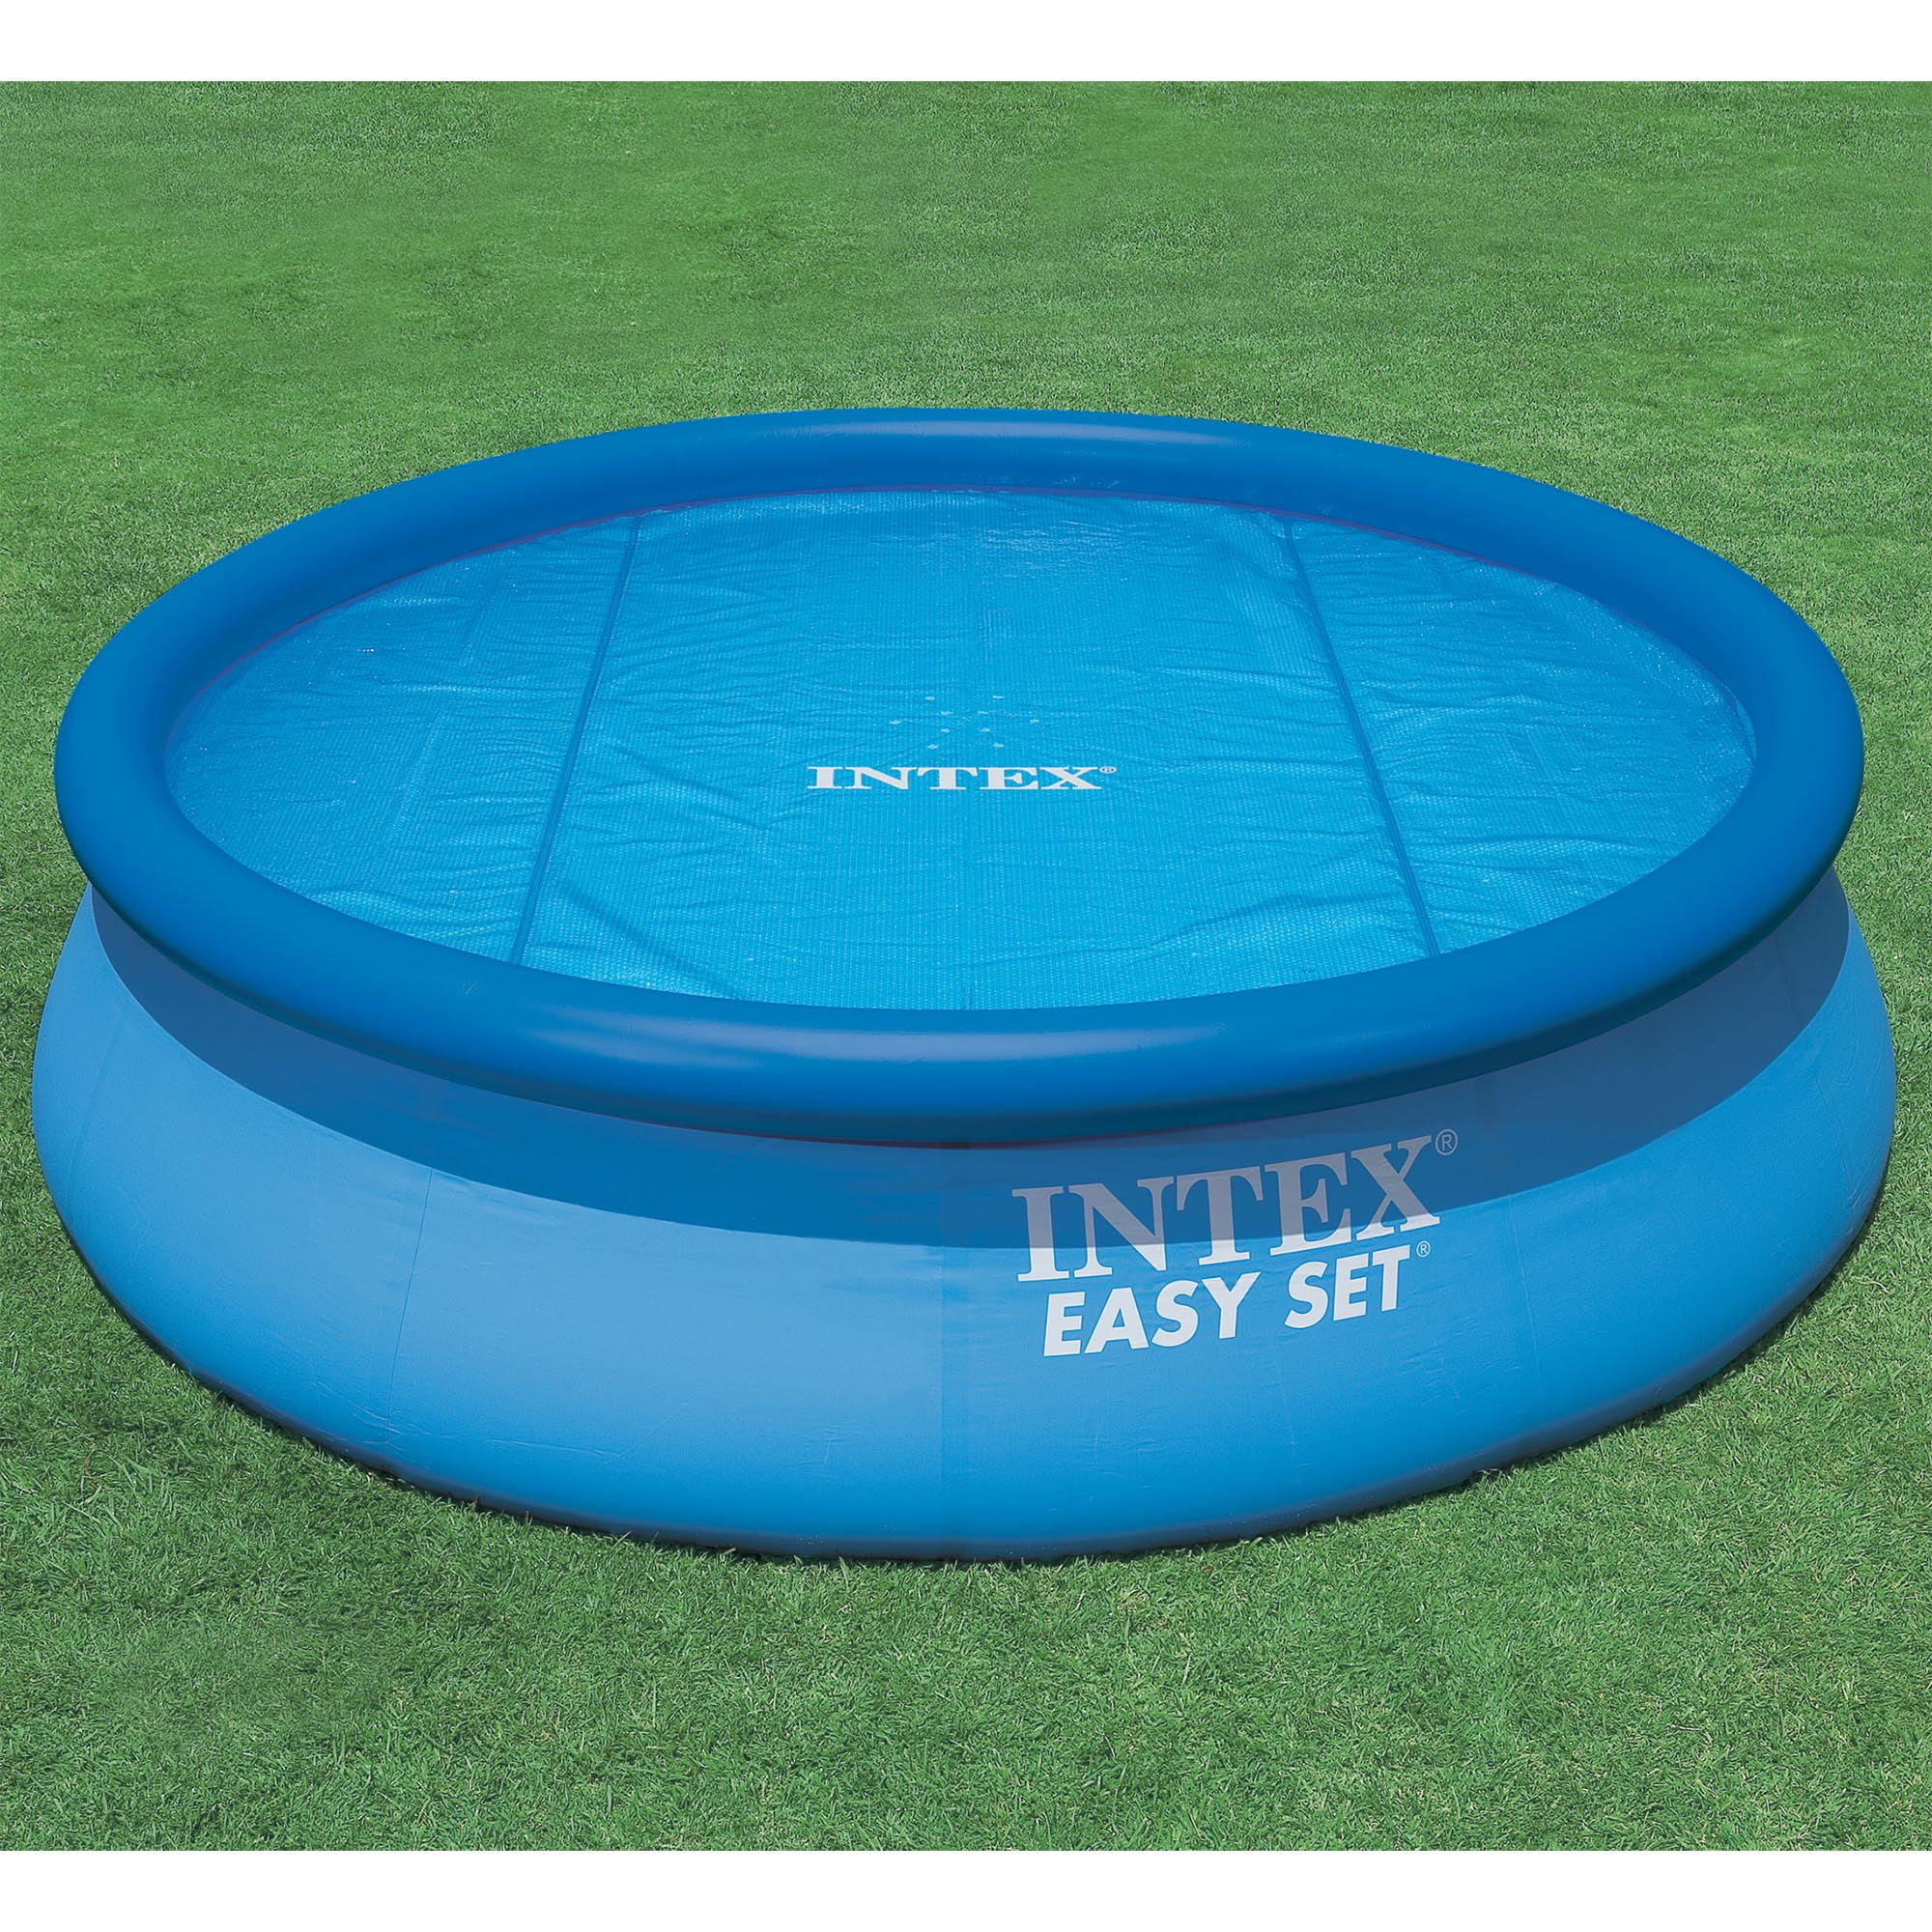 Solar Cover Lomsarsh Round Pool Cover for 8/10/12/15 ft Diameter Easy Set and Frame Pools Round Pool Cover Protector Foot Above Ground Blue Protection Swimming 